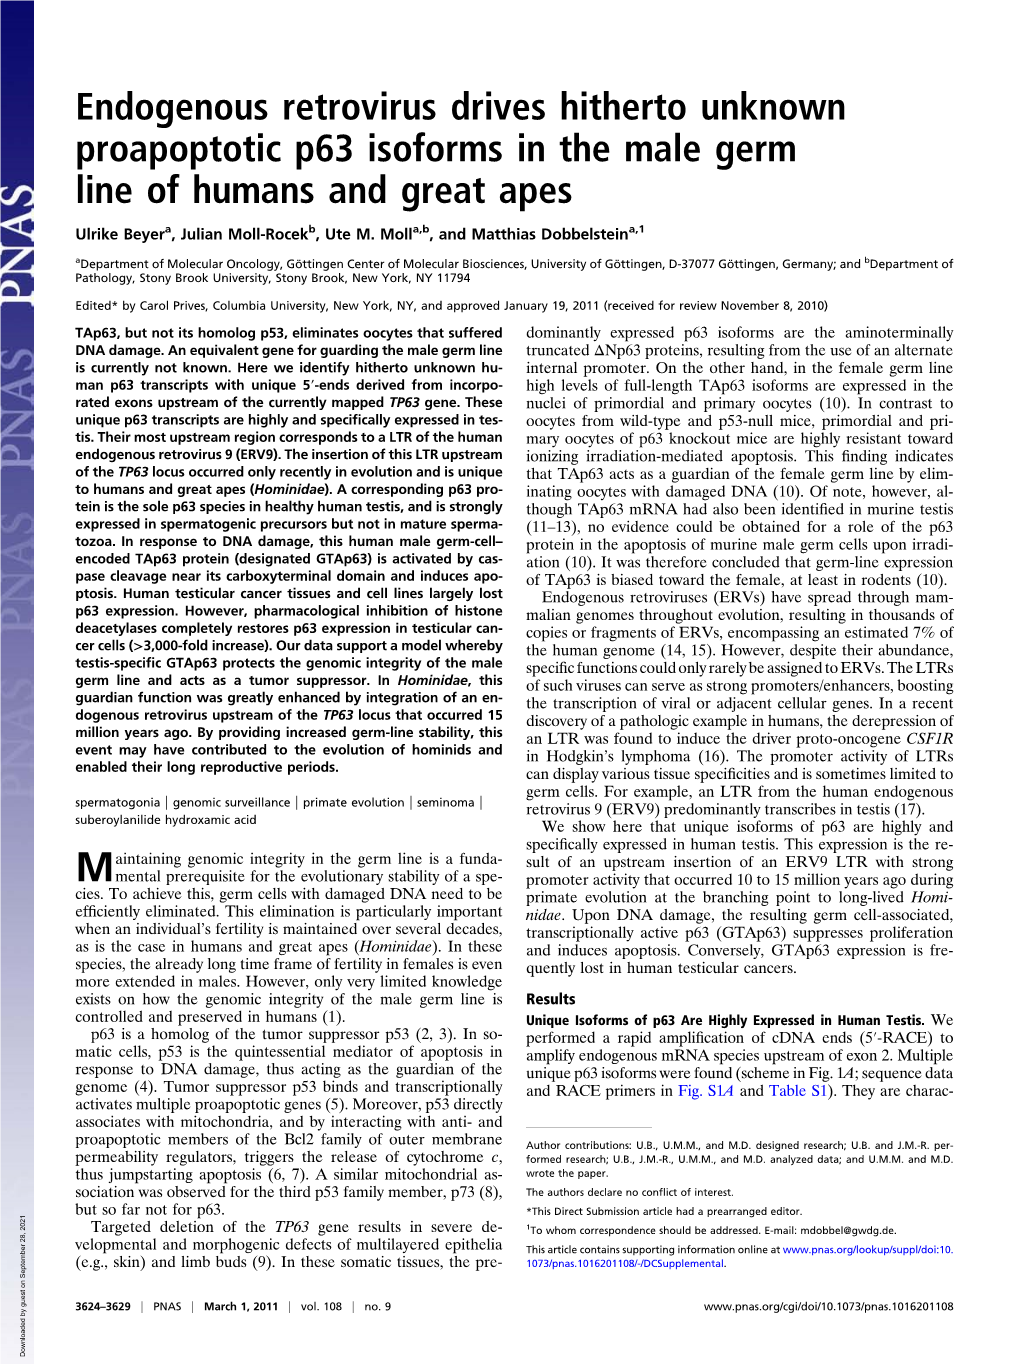 Endogenous Retrovirus Drives Hitherto Unknown Proapoptotic P63 Isoforms in the Male Germ Line of Humans and Great Apes